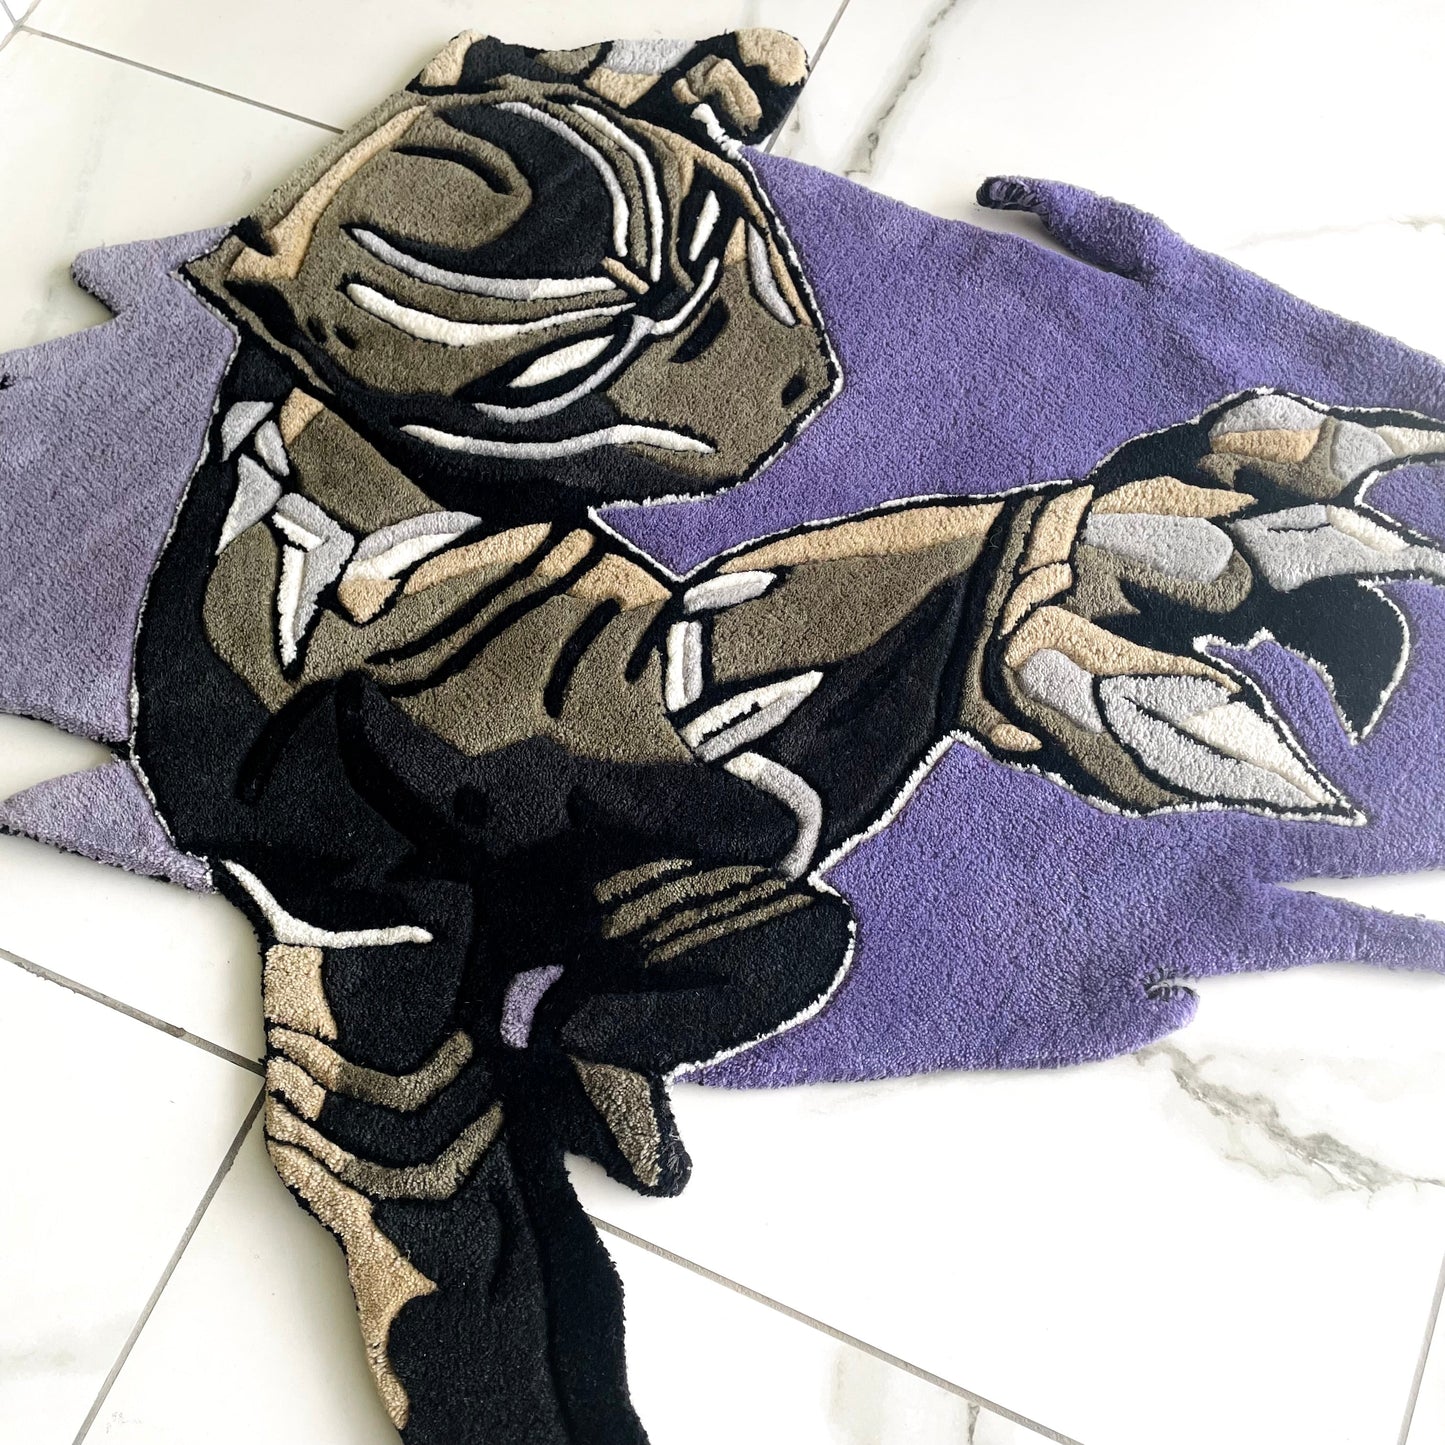 Black Panther Rug side view